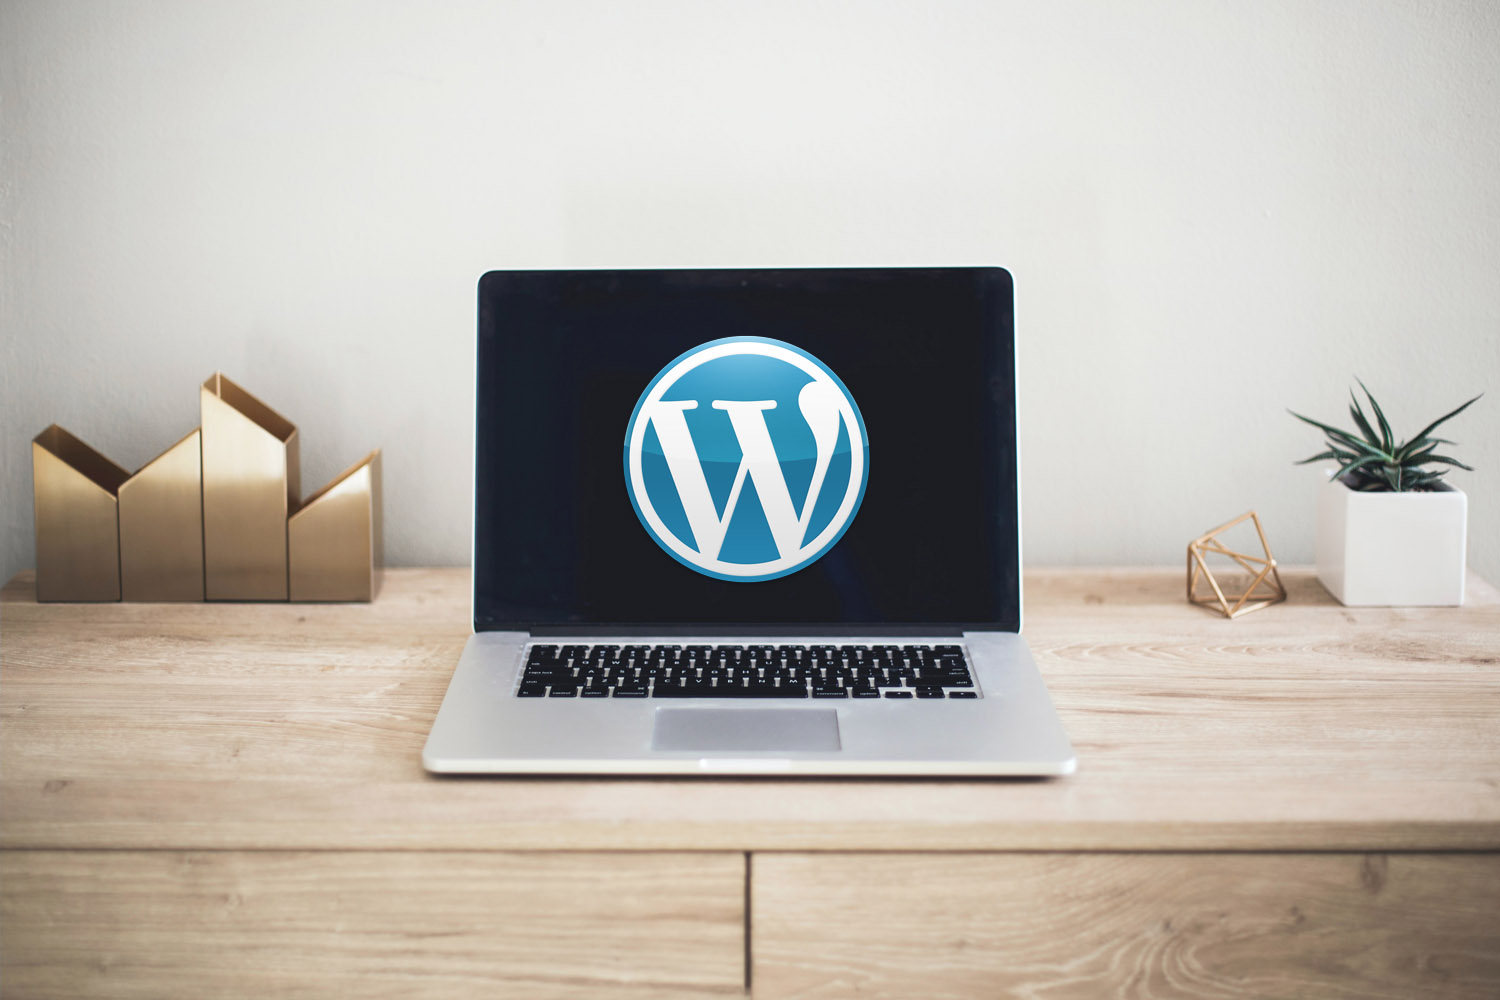 WordPress How-to Guide: Find and Execute 5 Basic Functions